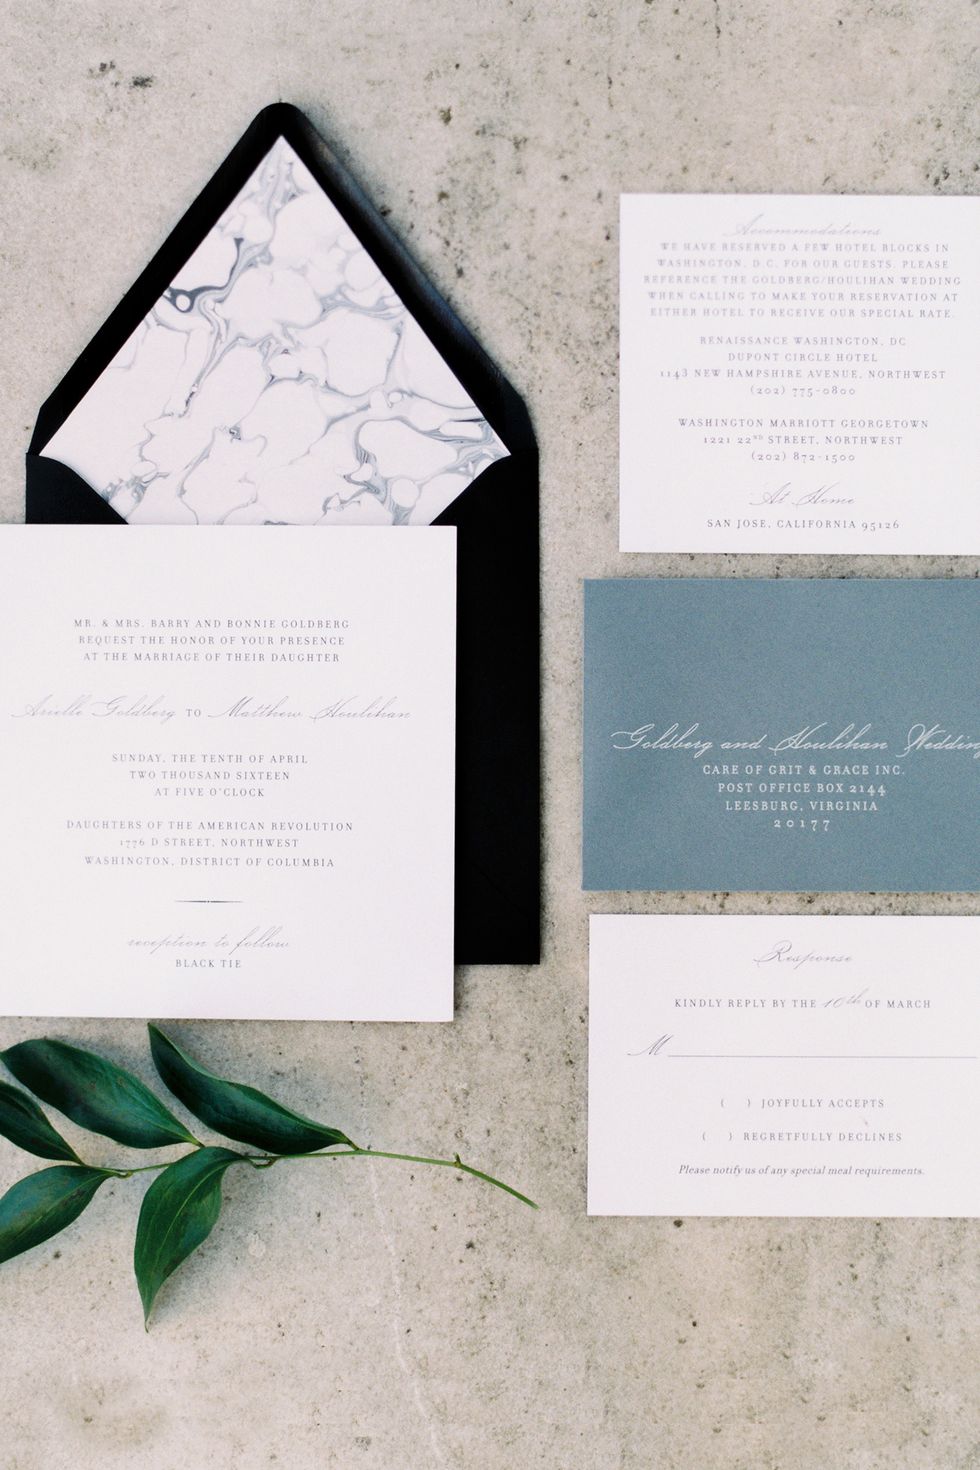 <p>"We wanted something very simple and classic, and we both have really been into marble <em>everything</em> lately, so we decided to get a custom marbled liner for each invitation," explained Arielle. Keeping to their color palette of black and white, the couple worked with <a href="http://www.paperzest.com/" target="_blank" tabindex="-1">Paperzest</a> to create their stationery suite.</p>